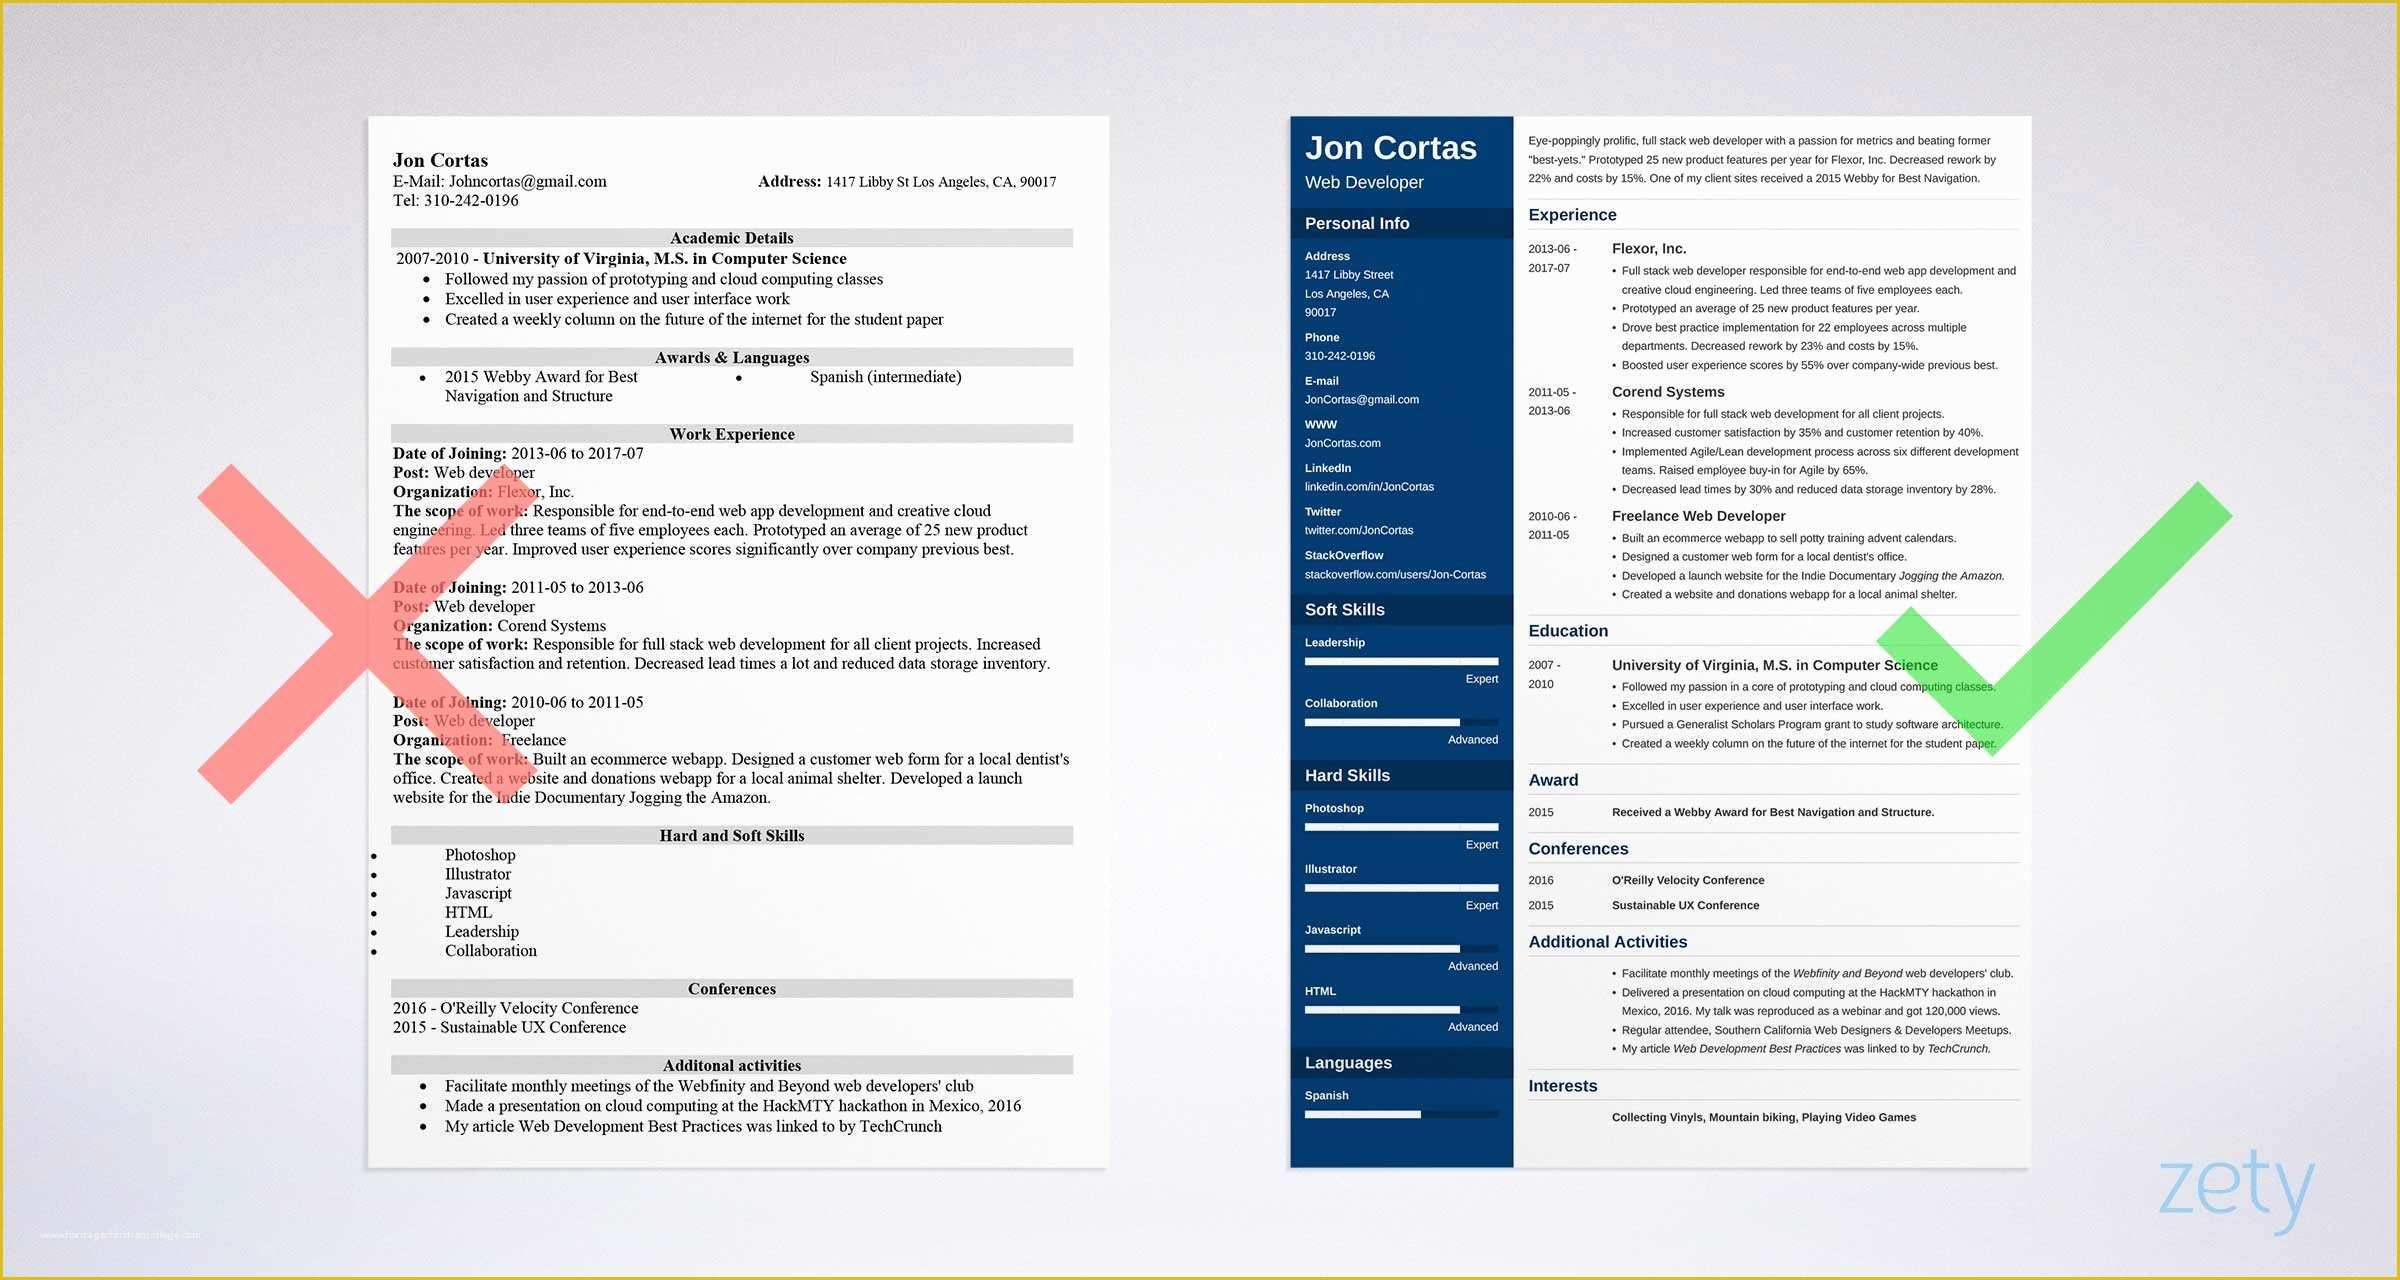 Free Word Resume Templates 2018 Of Free Resume Templates for Word 15 Cv Resume formats to